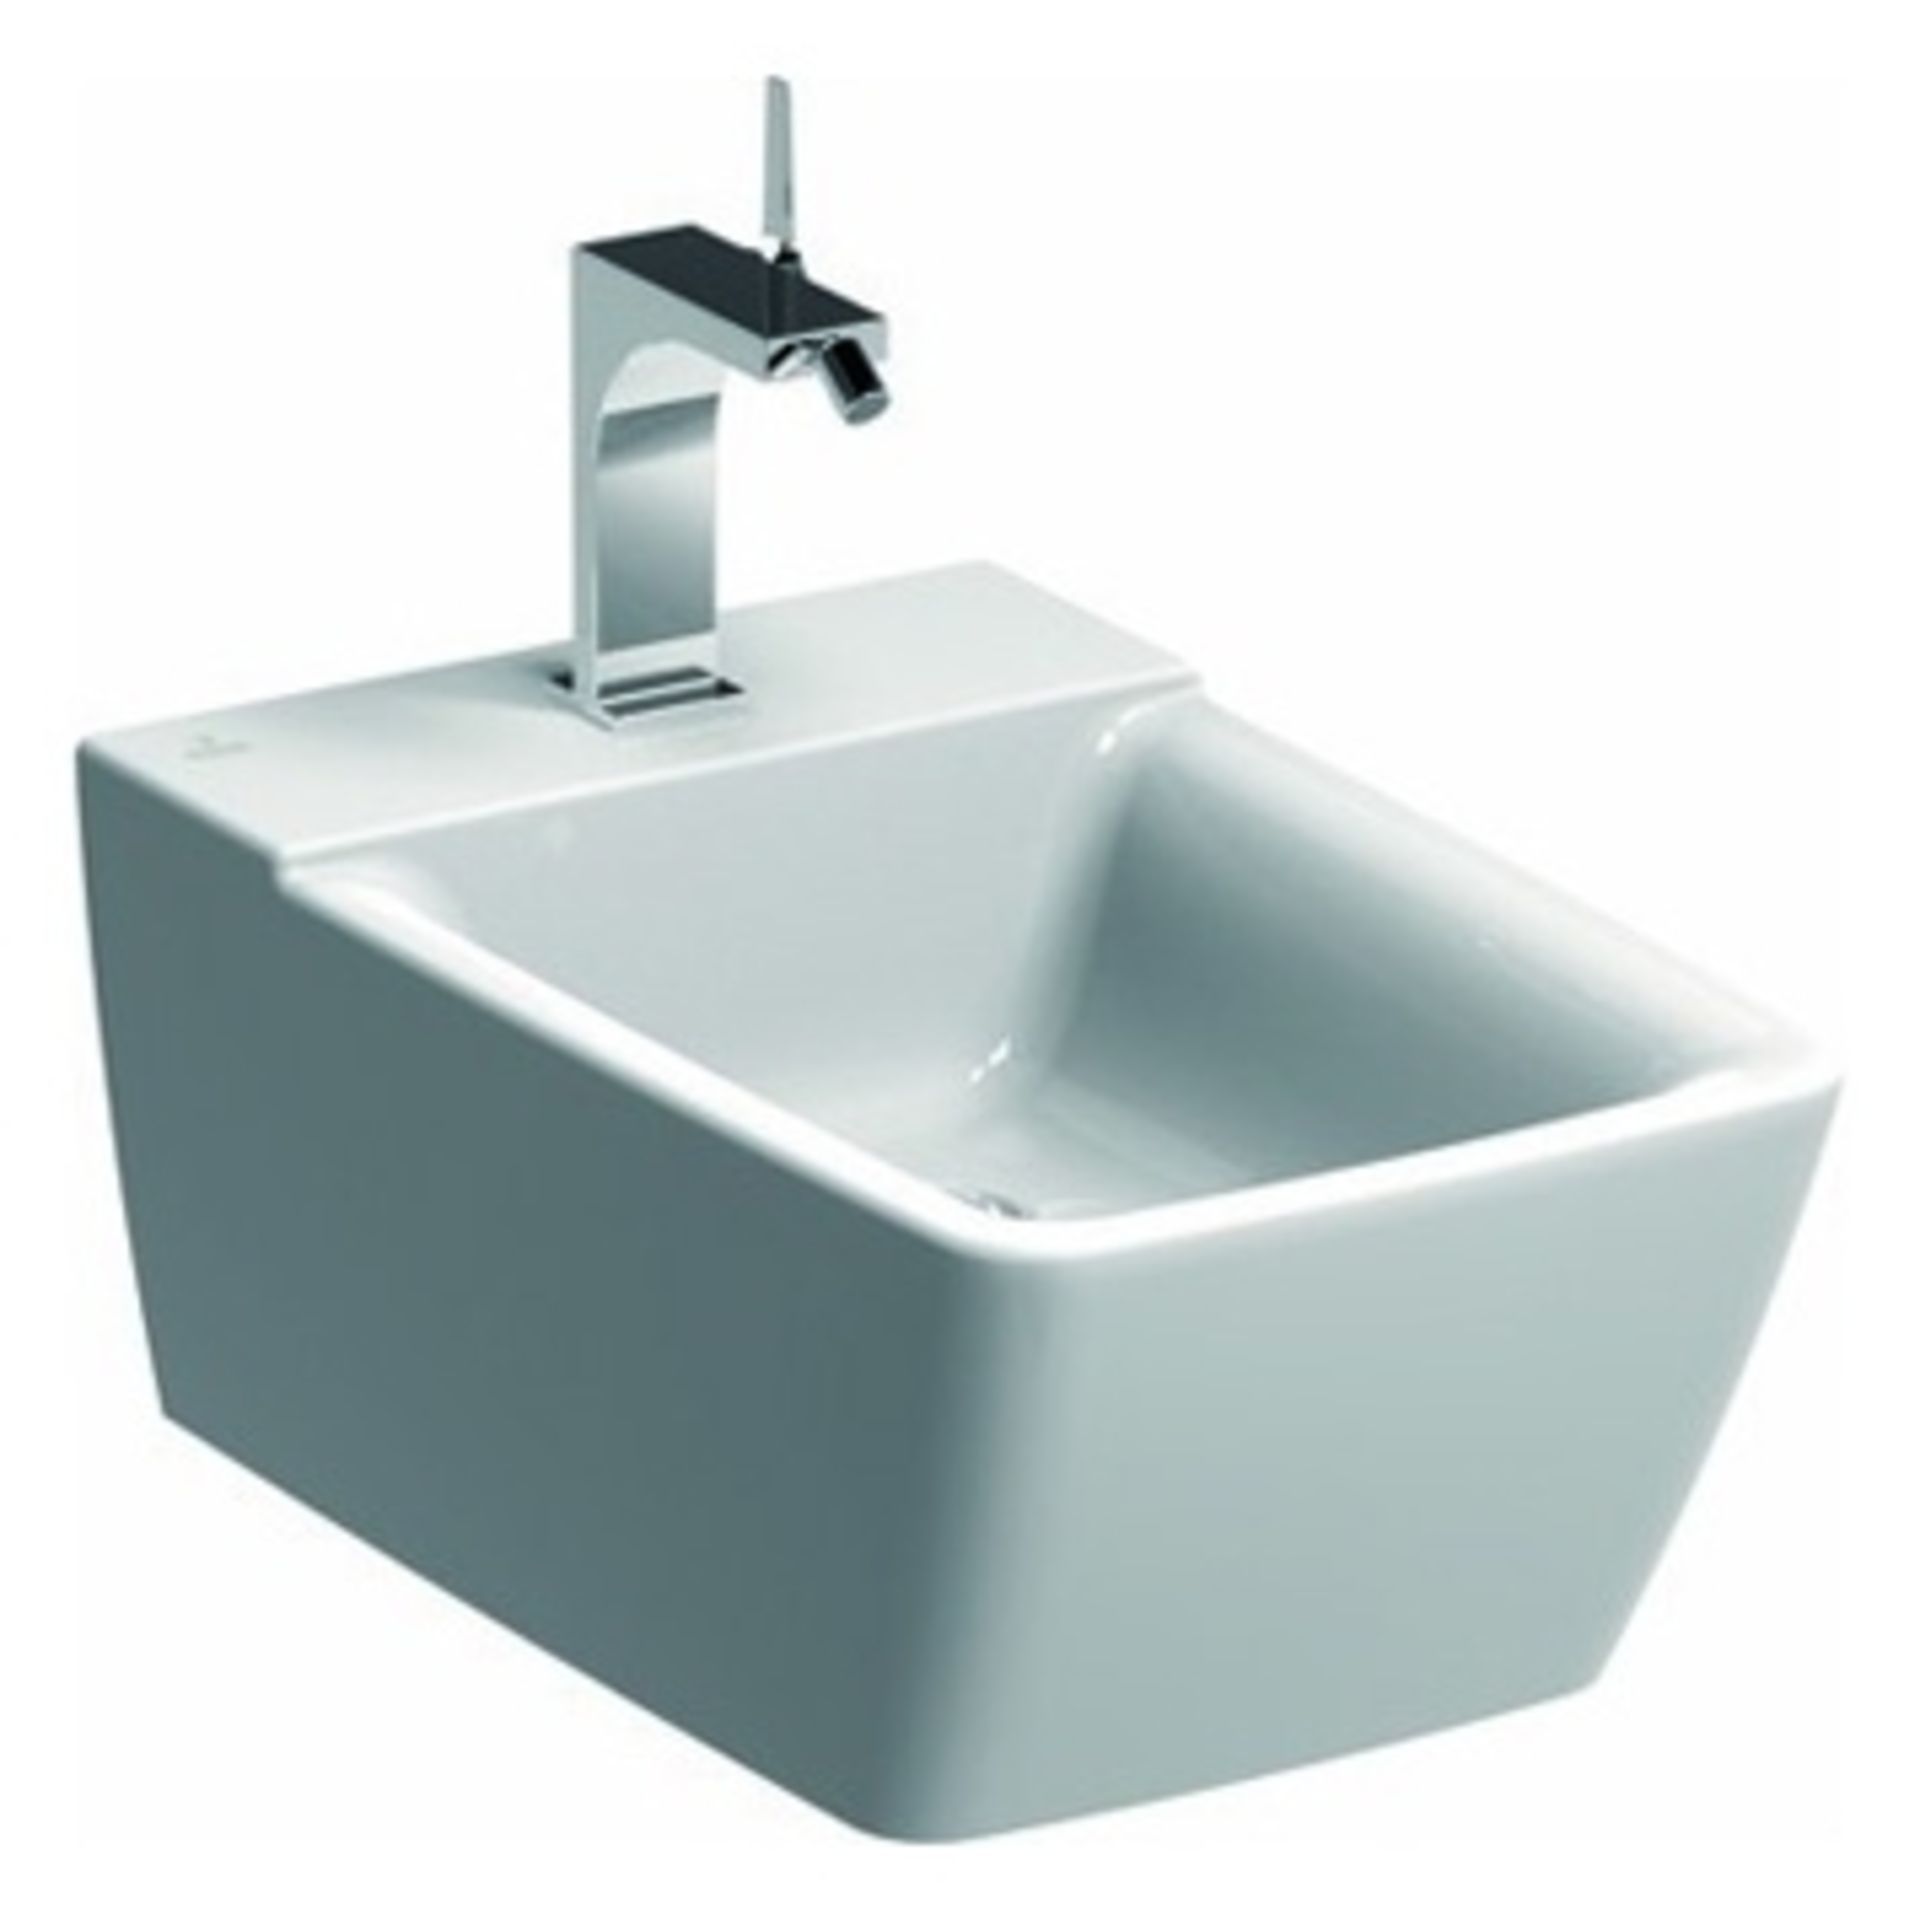 (XL56) Xeno 540mm Bidet Wall Hung. RRP £389.99.A premium bathroom series of products with rem... - Image 2 of 3